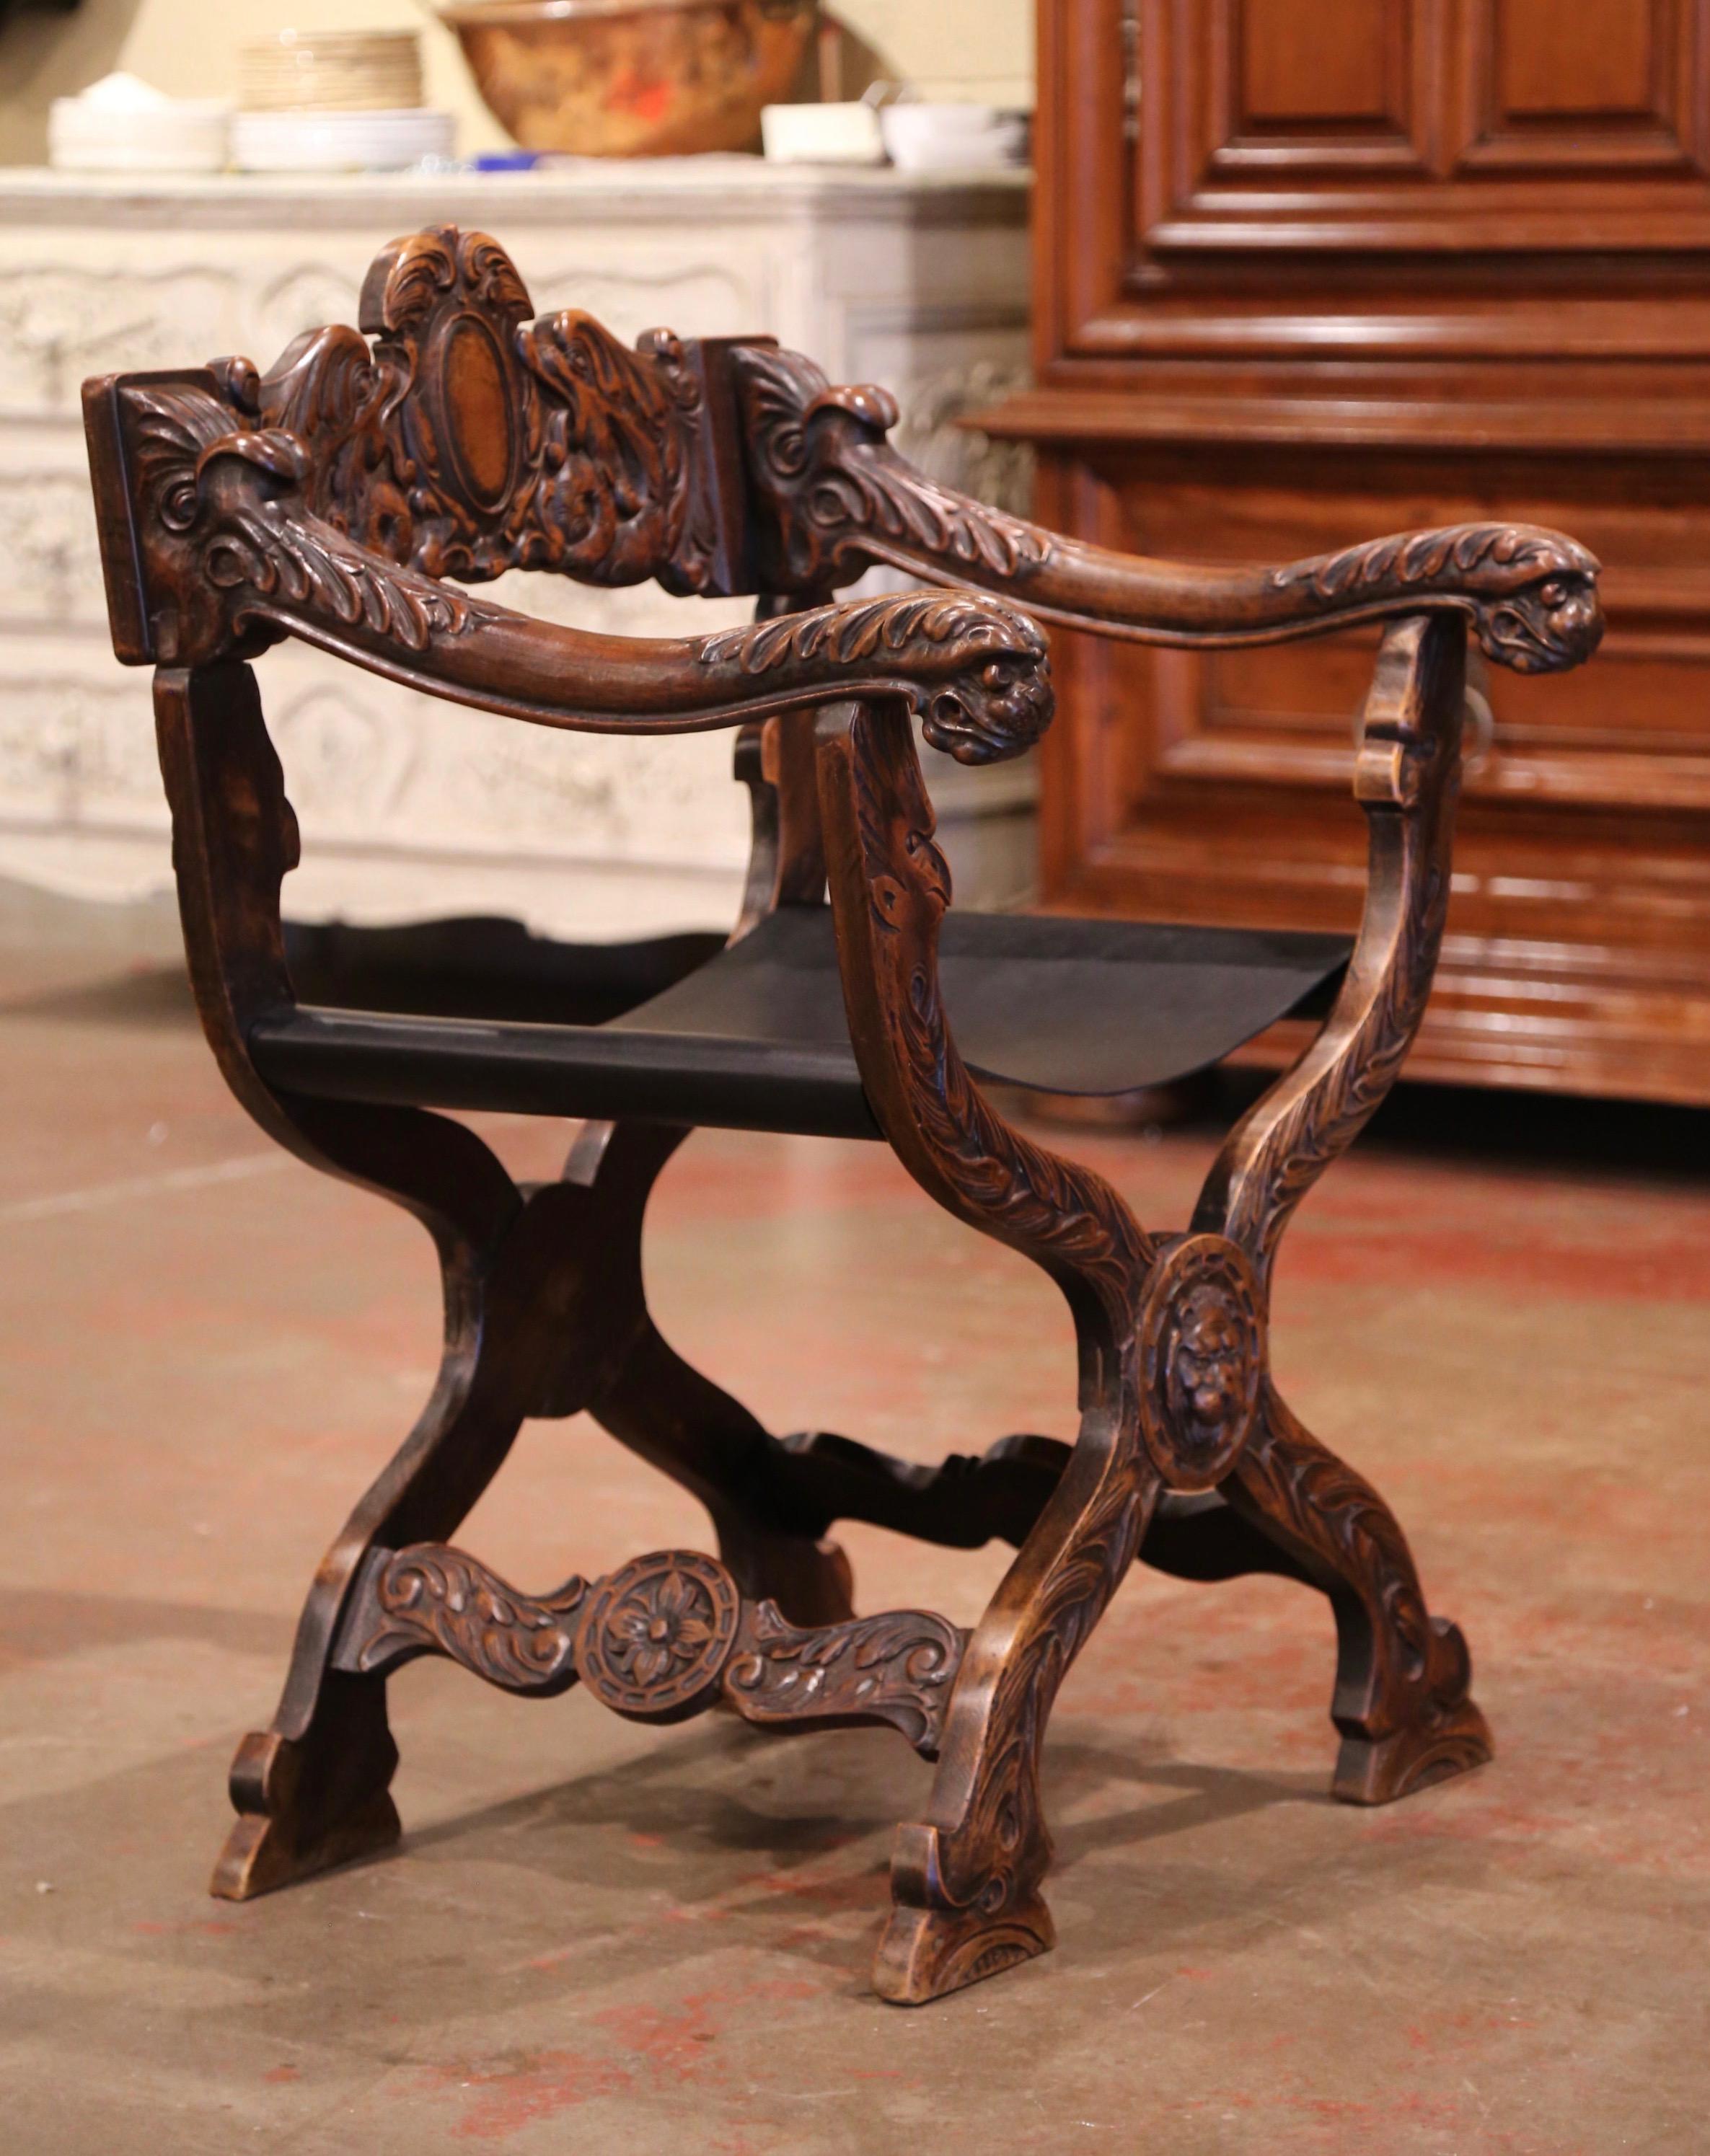 Hand-Carved 19th Century Italian Renaissance Carved Walnut Desk Armchair with Leather Seat